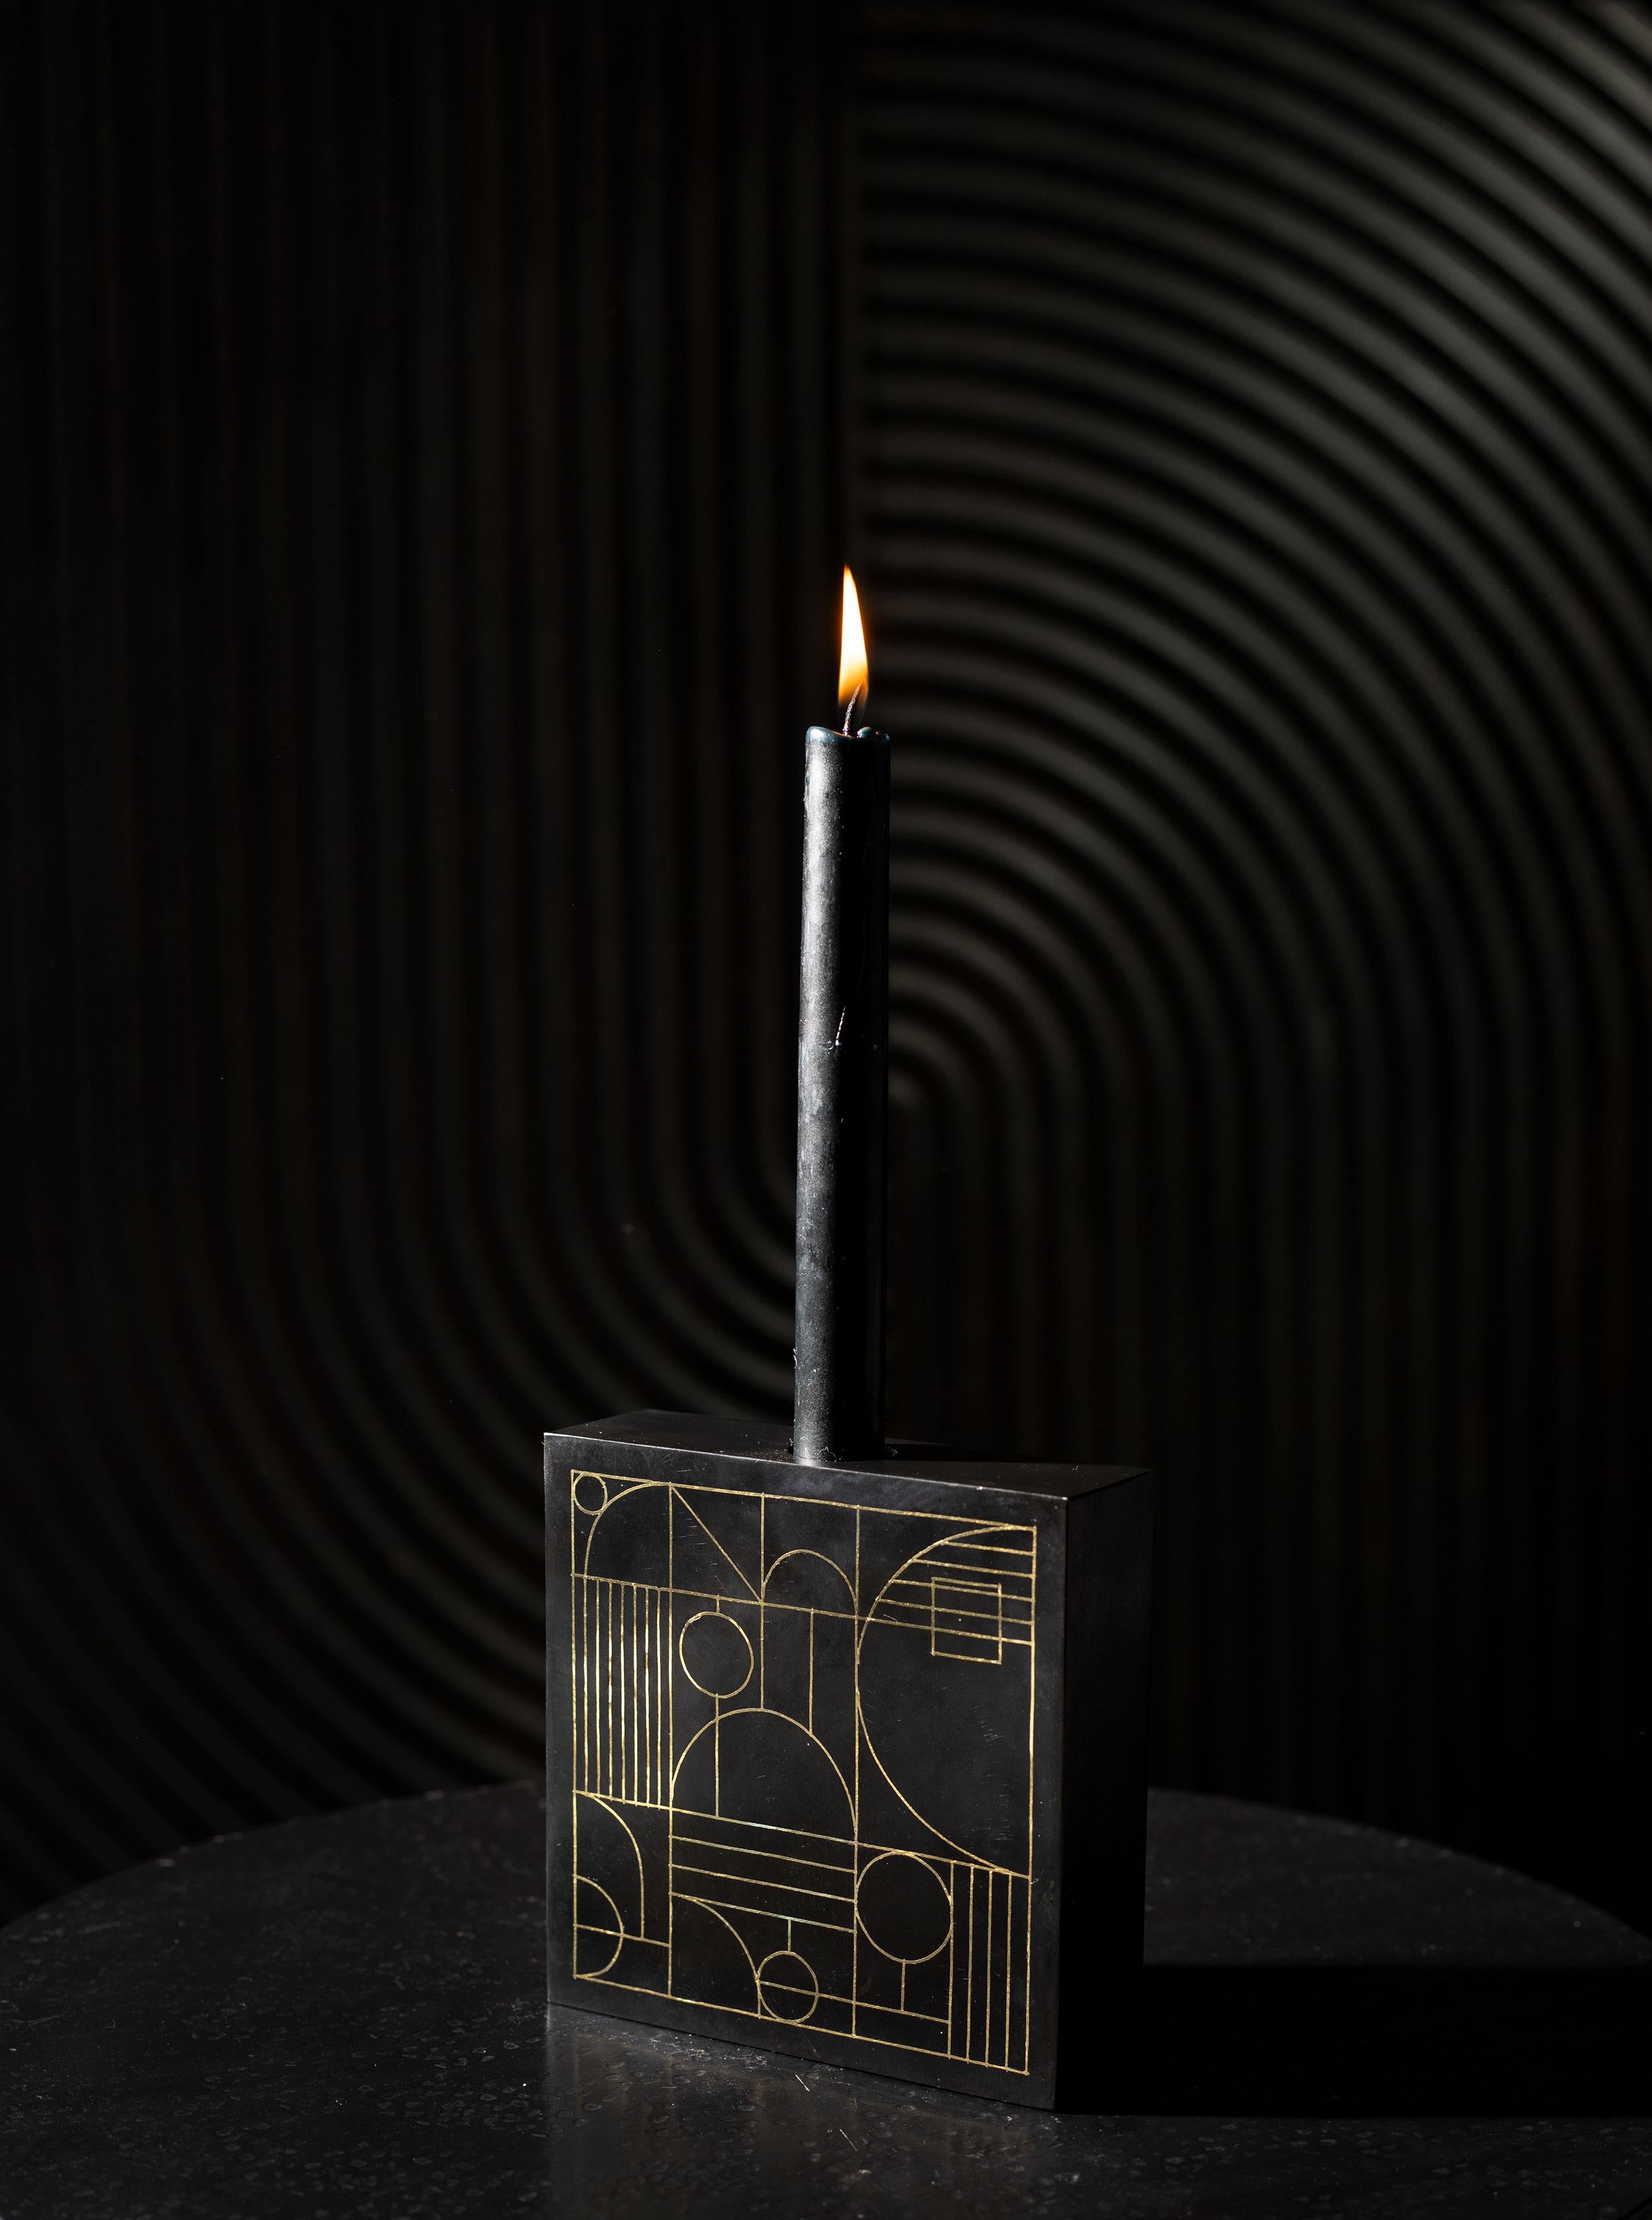 Our Art Deco-inspired candleholders are ethically handcrafted by artisans in Southern India using a technique that is native to the region. The artisans use a metal alloy that is blackened with a locally found soil, and the piece is inlaid with